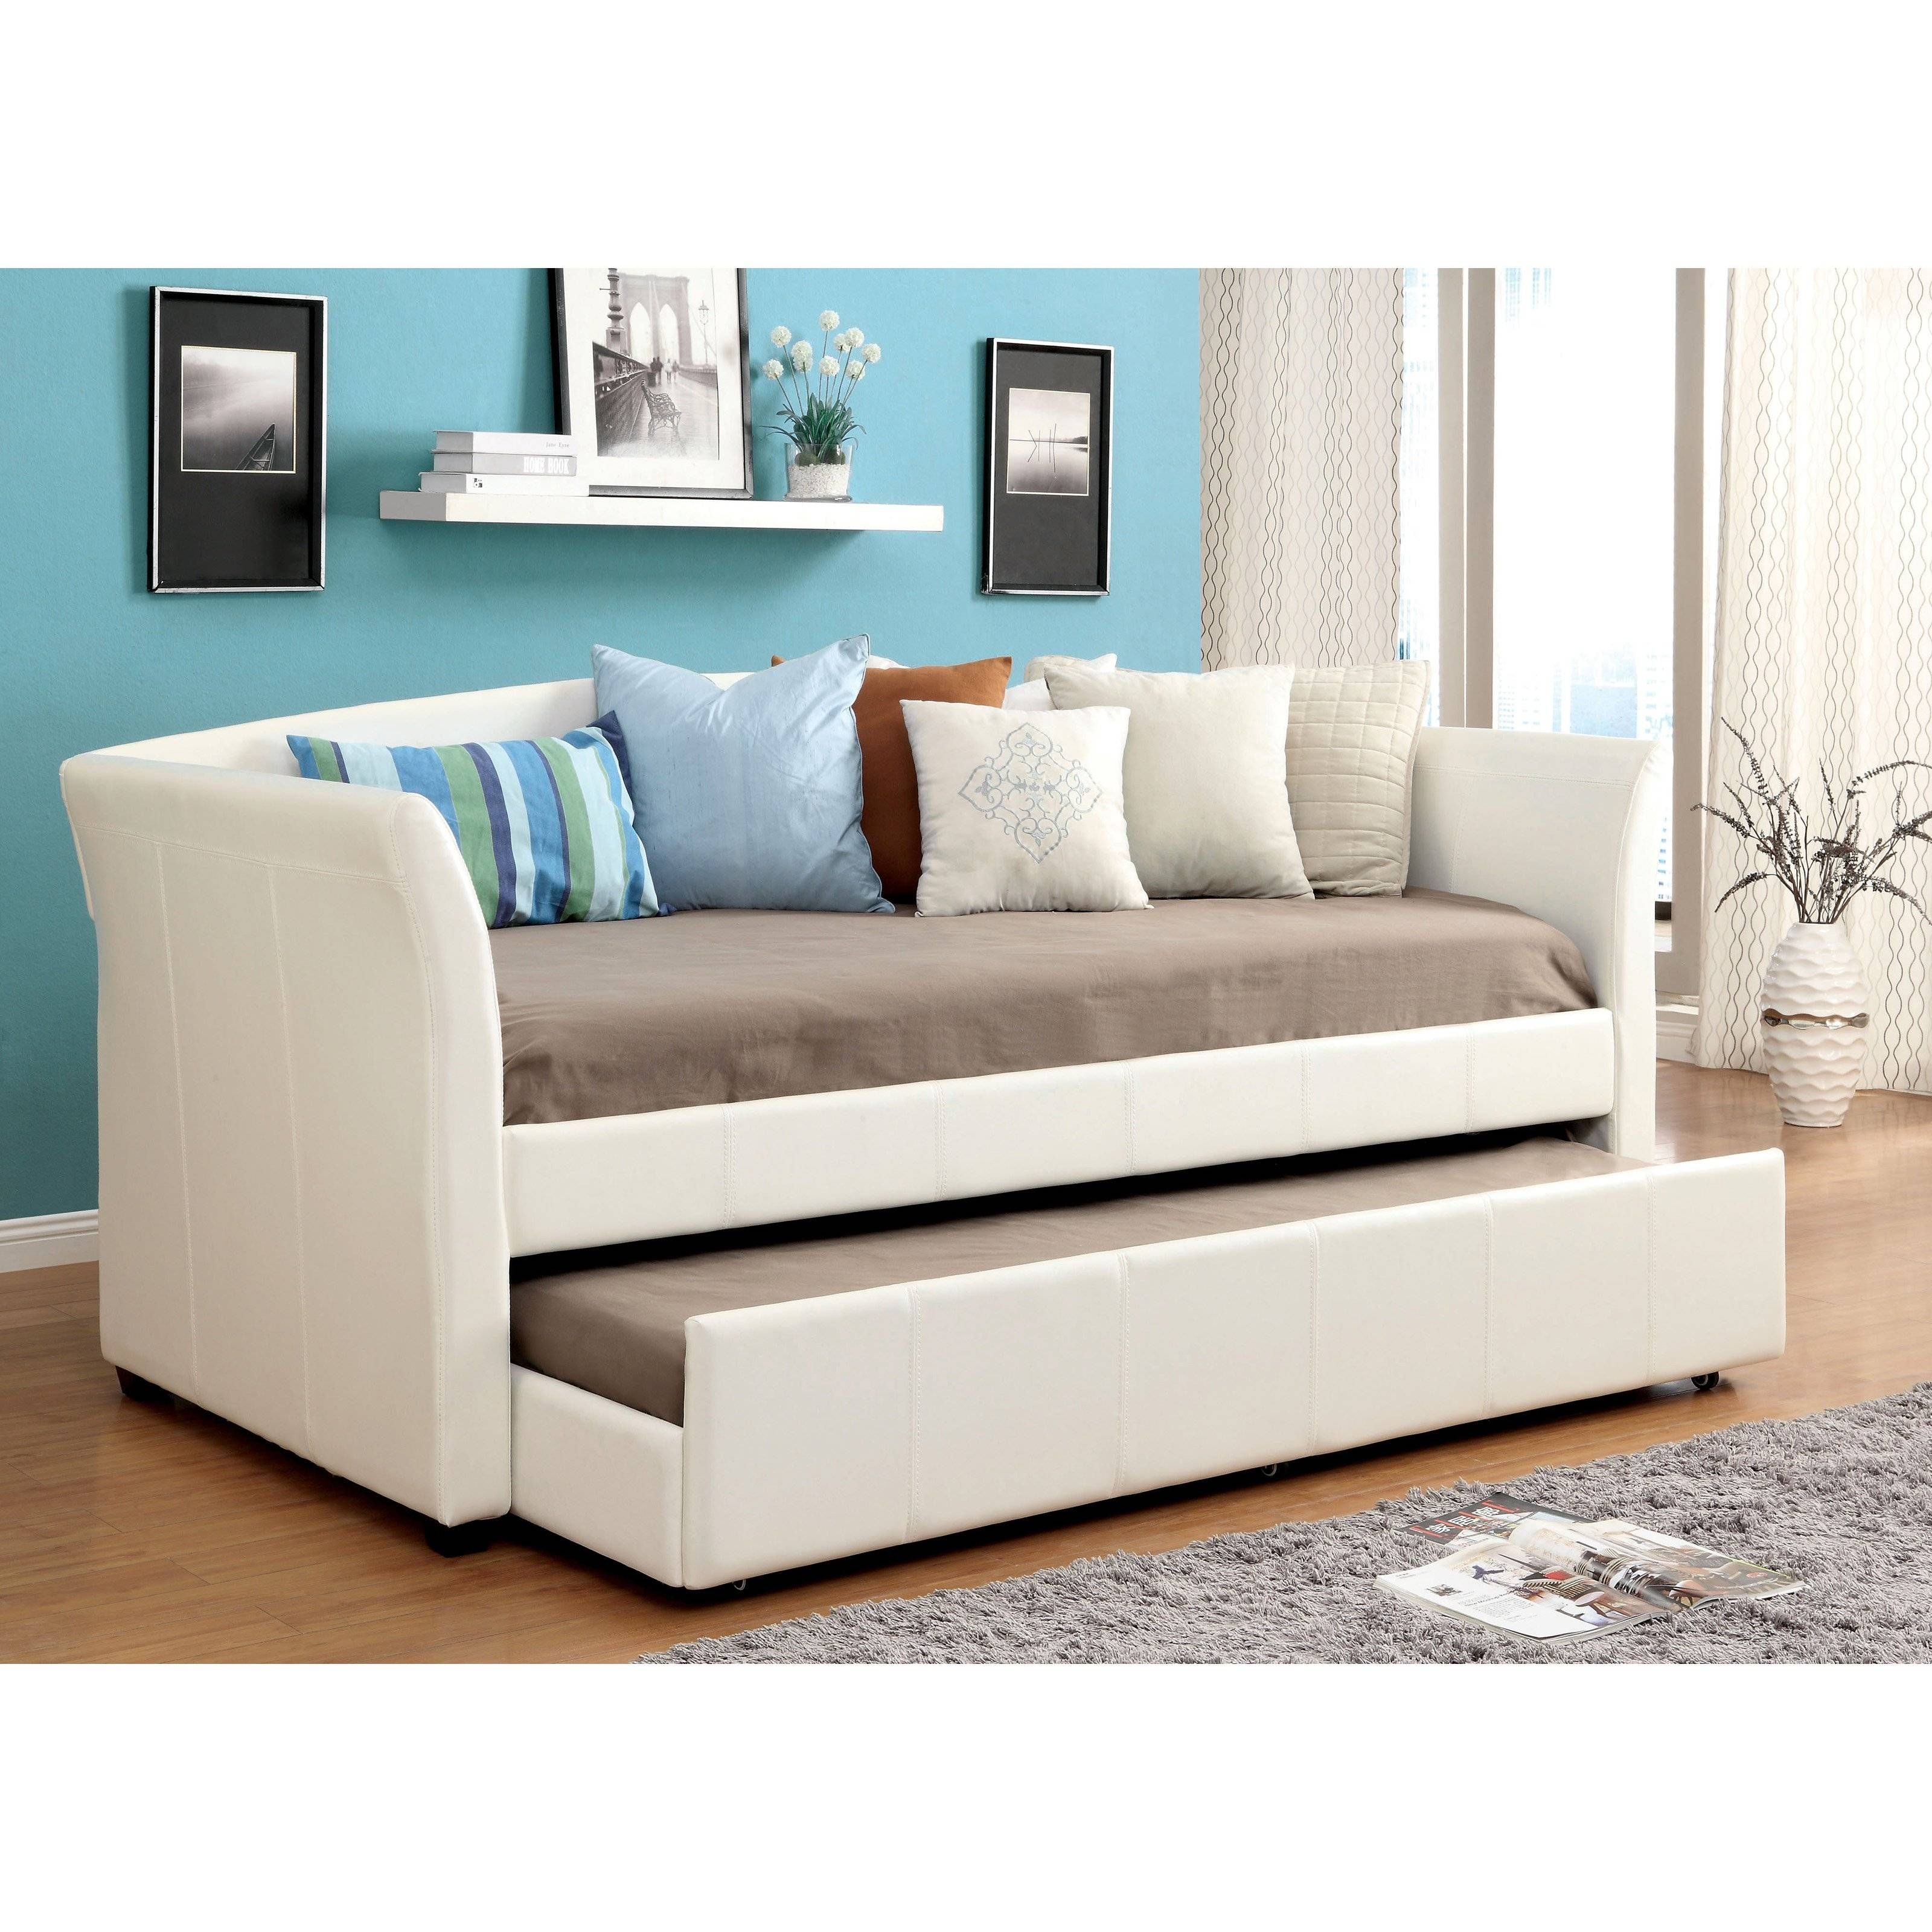 Furniture Of America Roby Leatherette Daybed With Trundle | Hayneedle Intended For Sofas Daybed With Trundle (Photo 15 of 15)